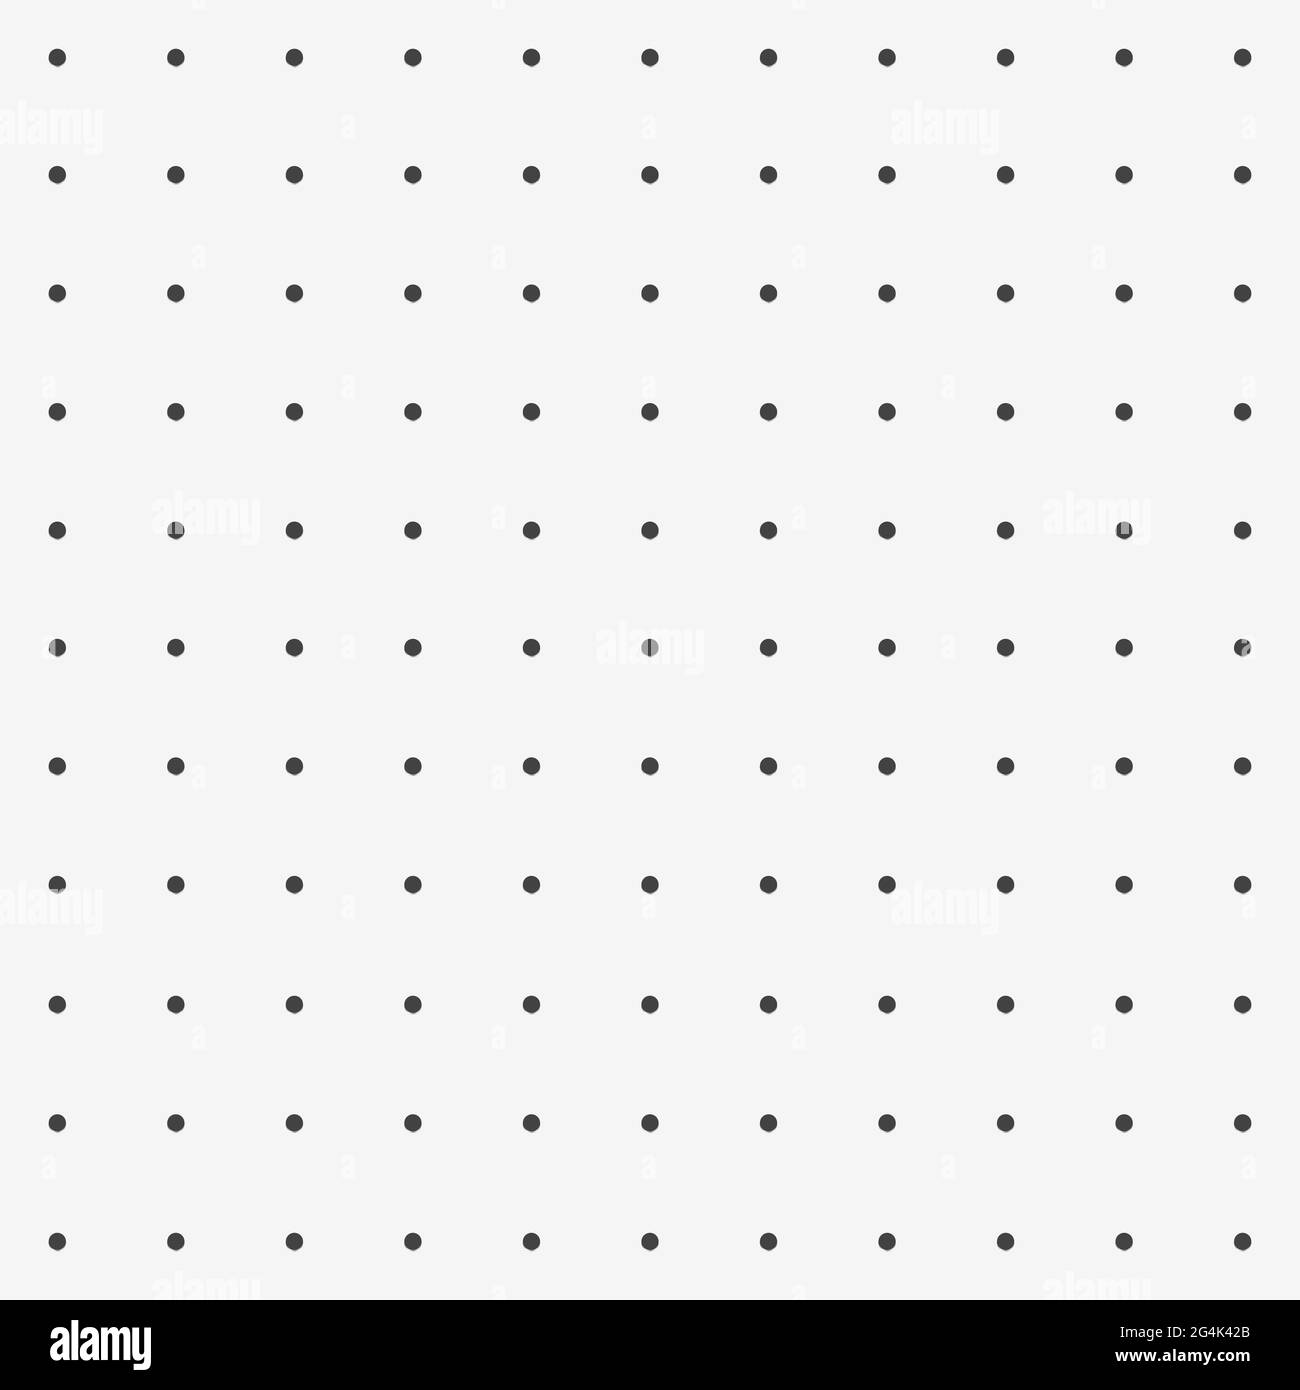 Peg board perforated texture background material with round holes seamless pattern board vector illustration. Wall structure for working bench tools. Stock Vector